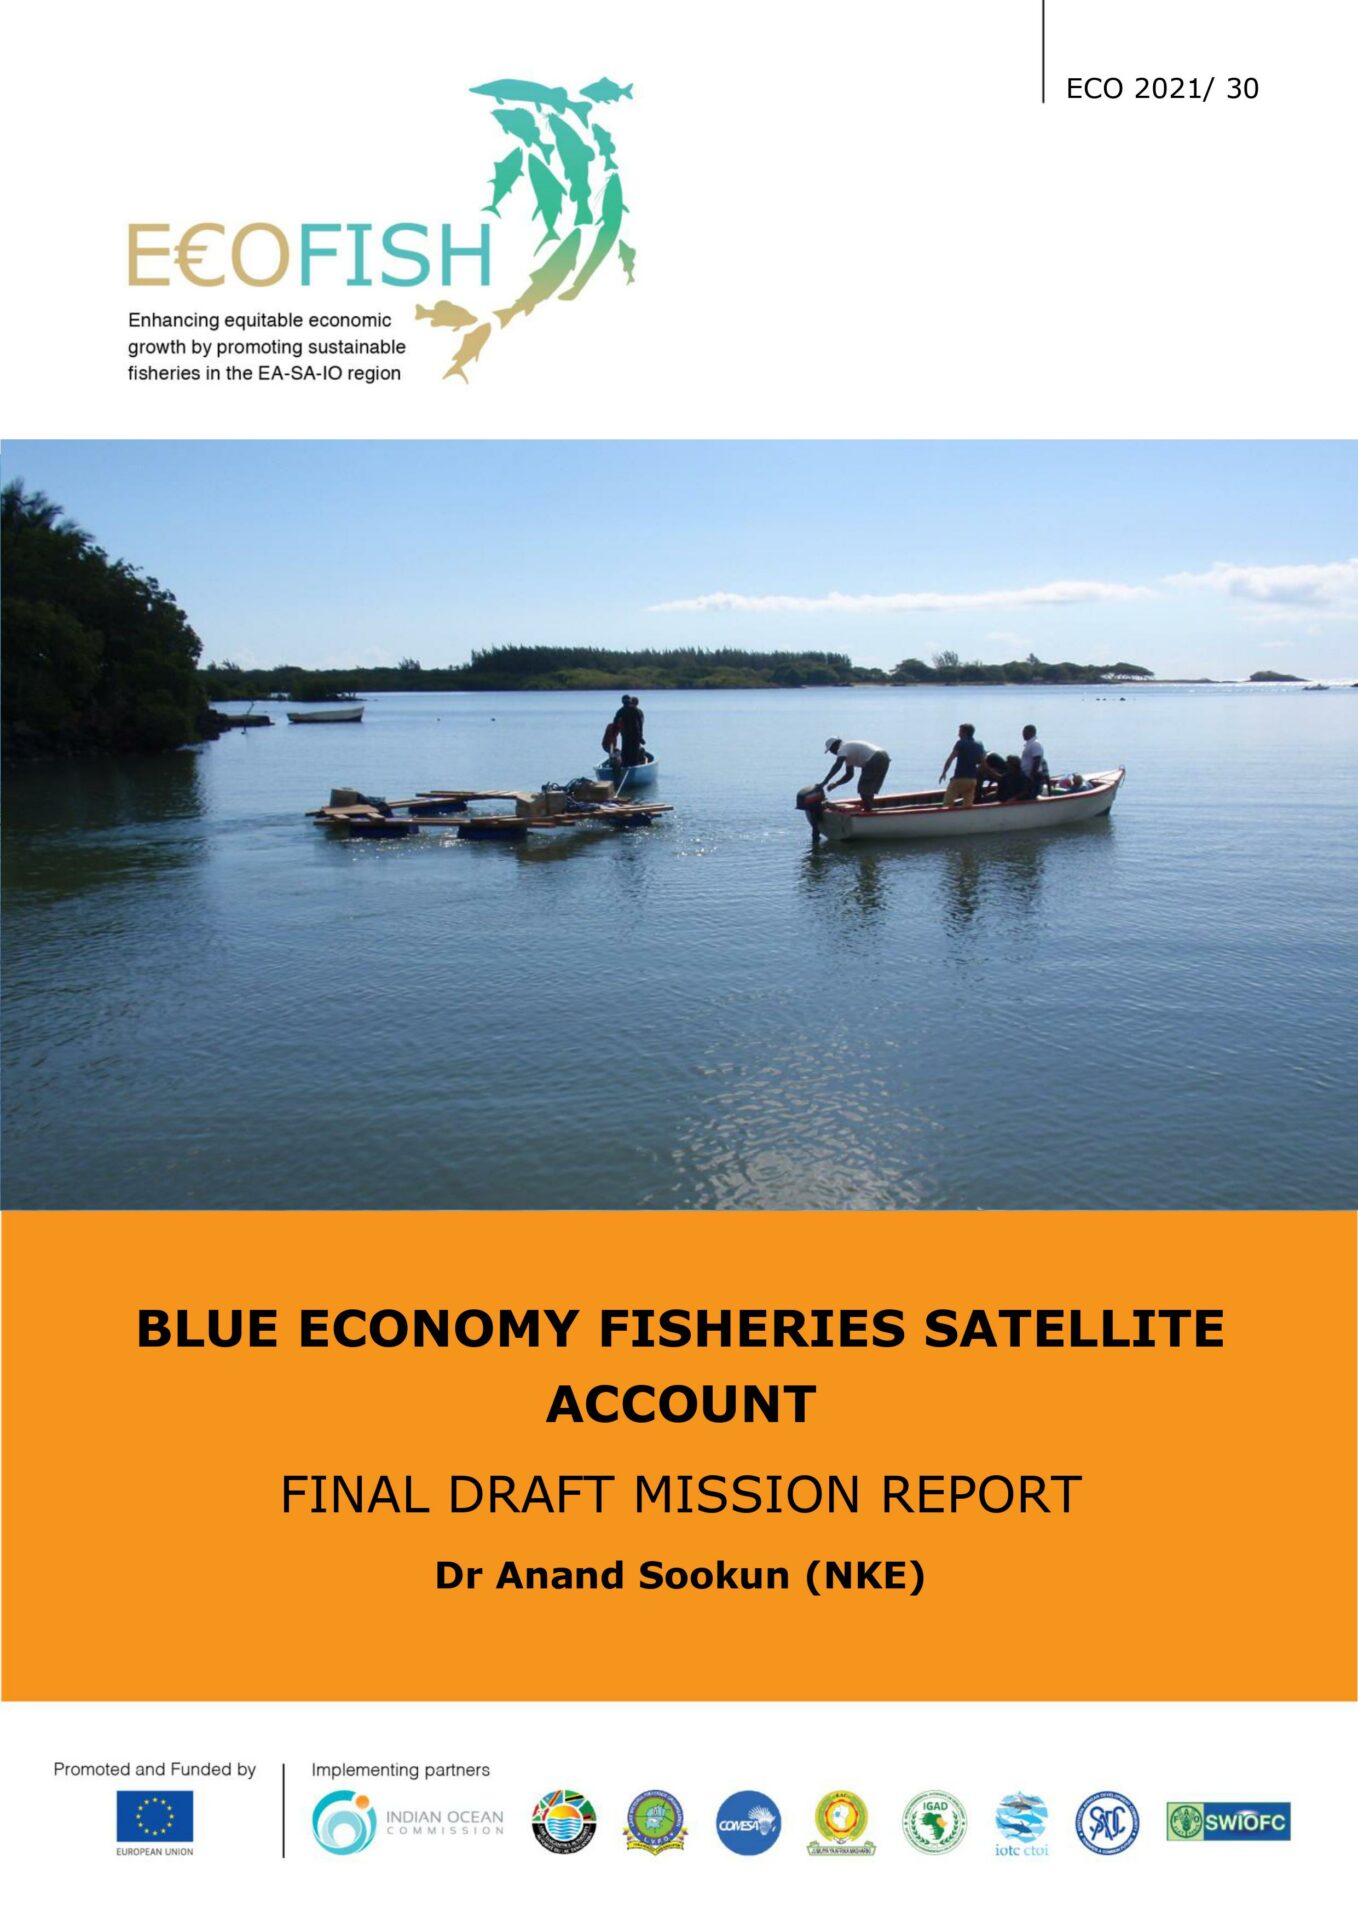 BLUE-ECONOMY-FISHERIES-SATELLITE-ACCOUNT-FINAL-DRAFT-MISSION-REPORT